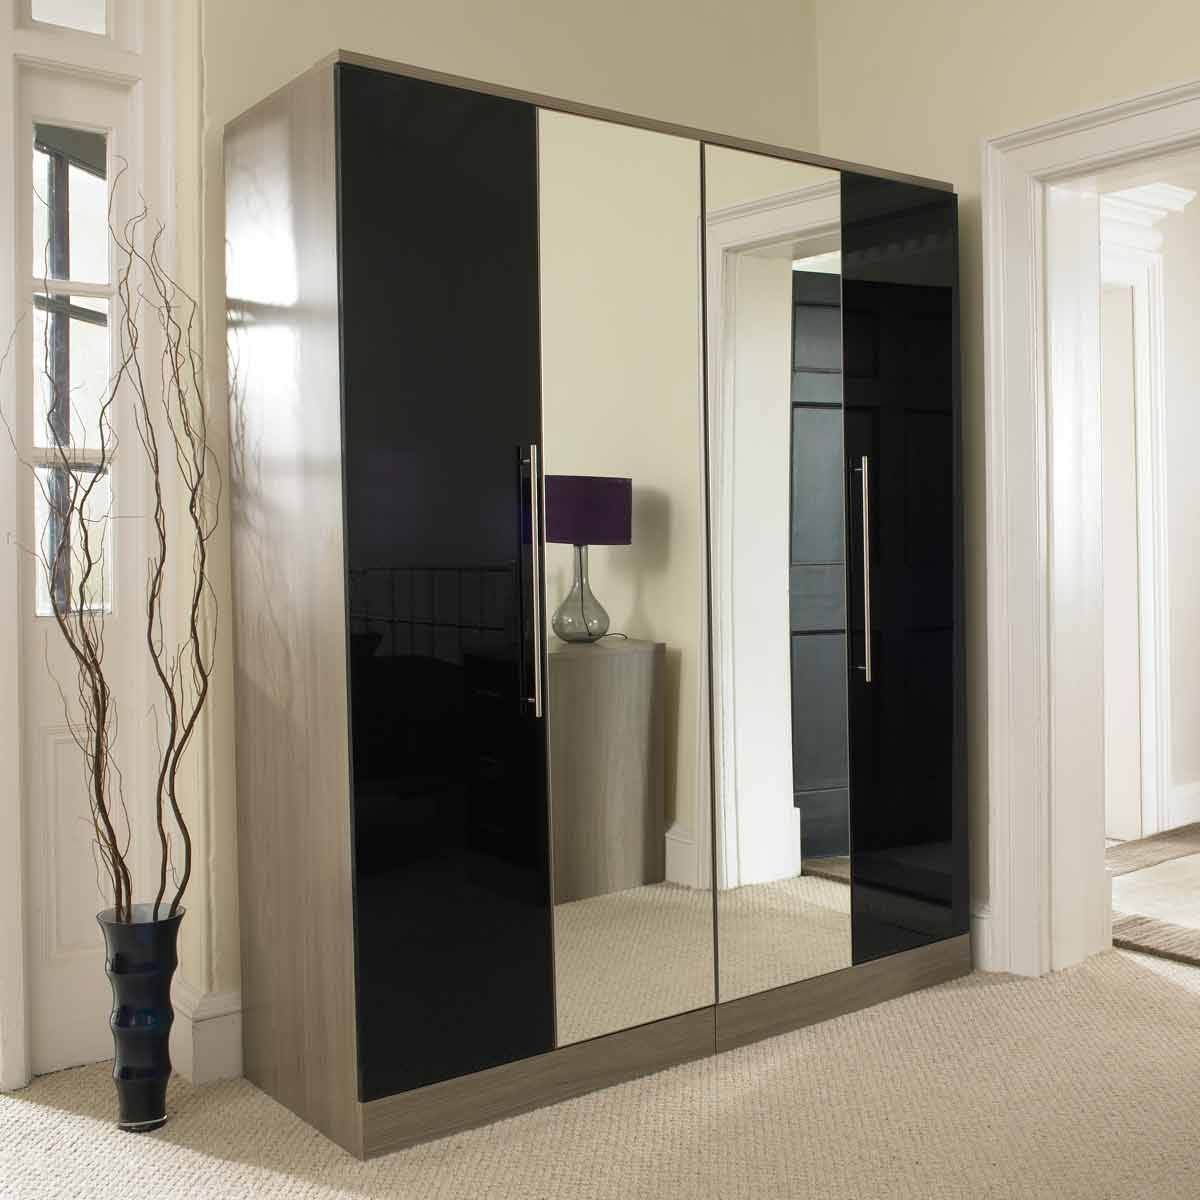 Extraordinary Mirror Cupboards C9f4b323a95ee0410eeb2eedafb7168f Pertaining To Cheap Wardrobes With Mirrors (View 8 of 15)